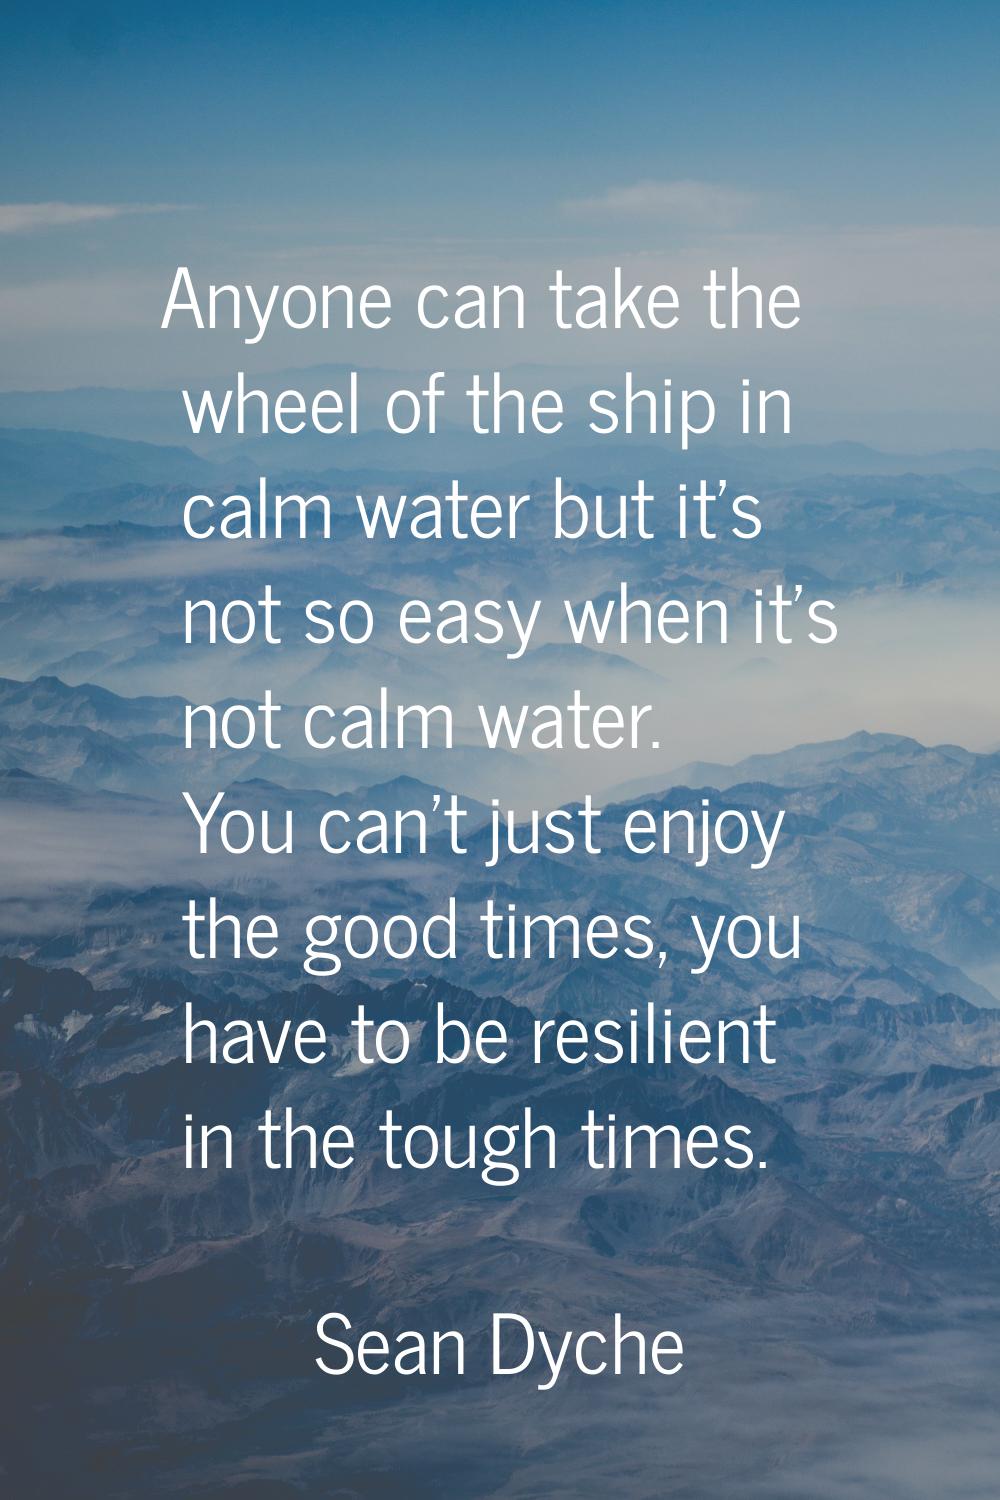 Anyone can take the wheel of the ship in calm water but it's not so easy when it's not calm water. 